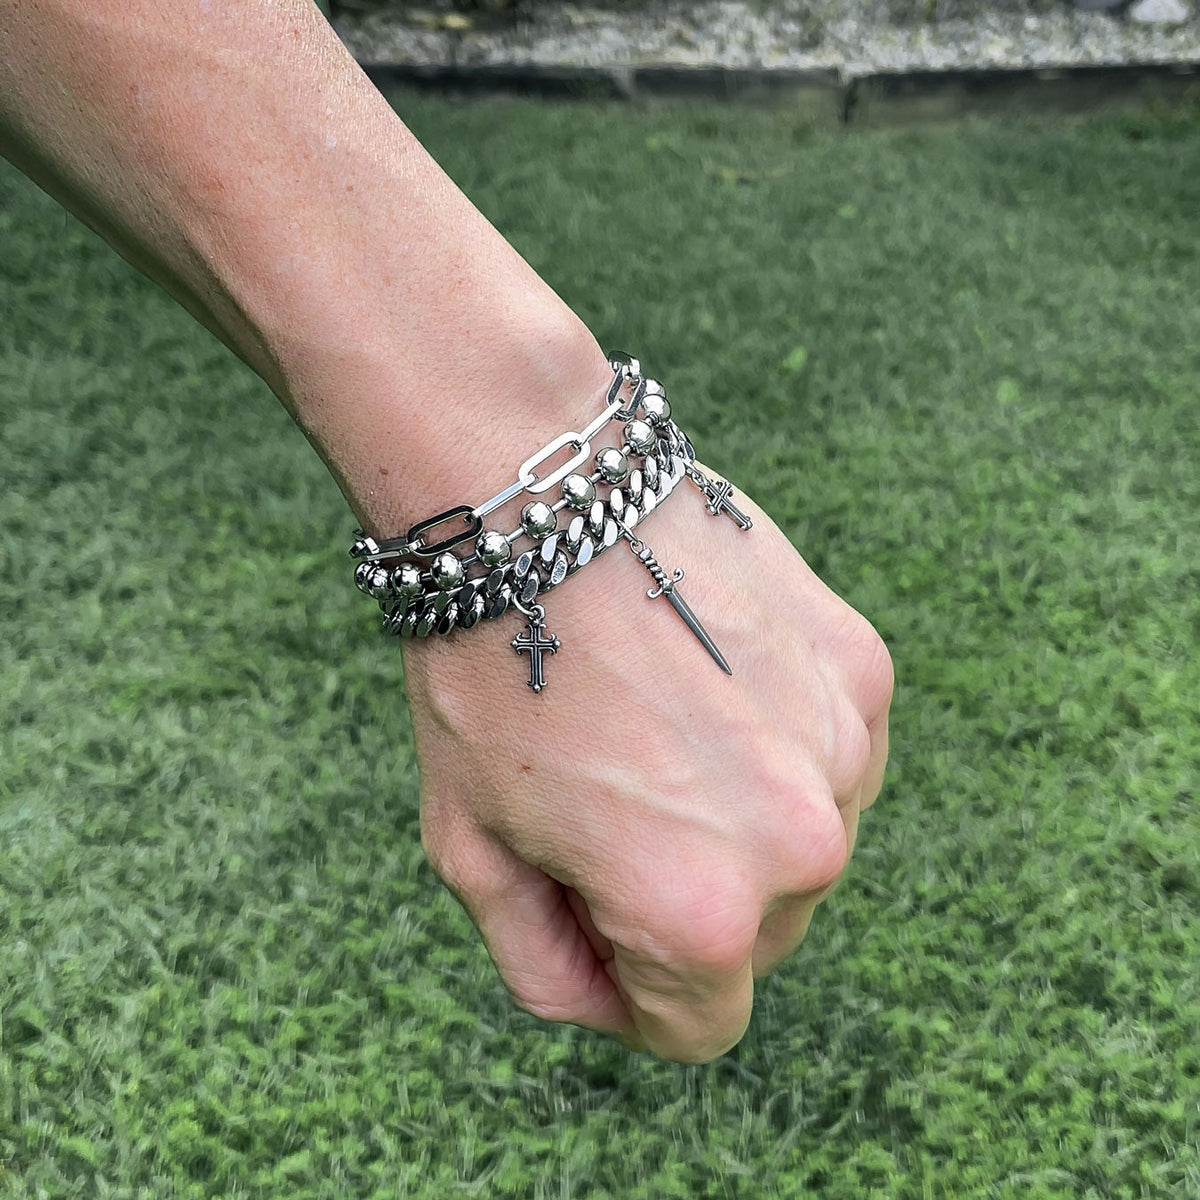 bracelet with dagger charm attached